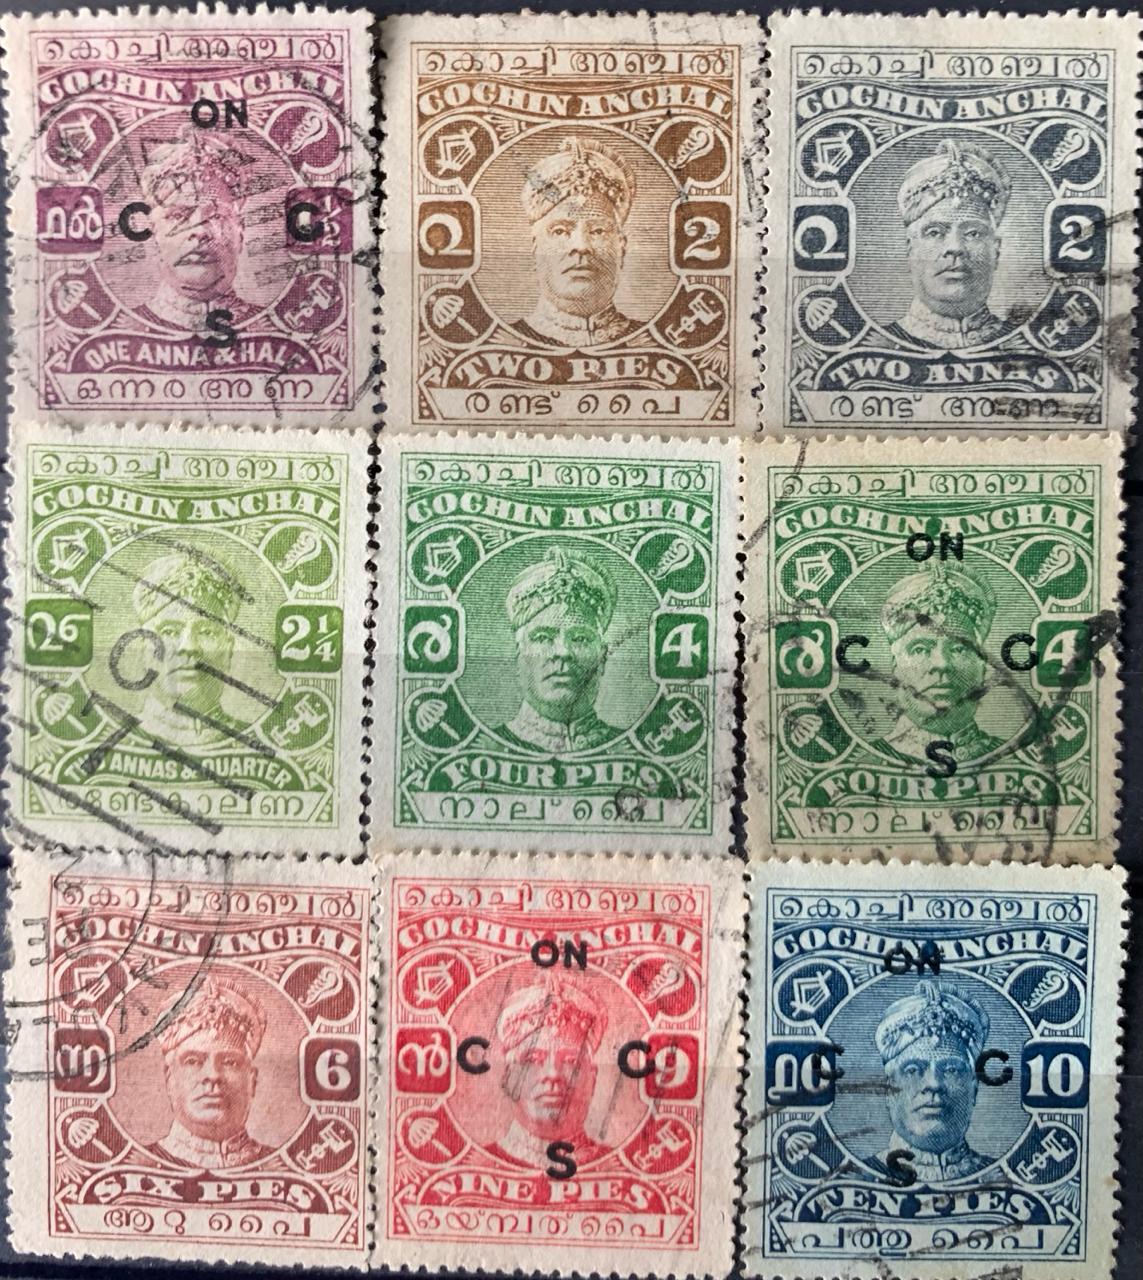 India 1940 Cochin Anchal 9 different stamps Collection